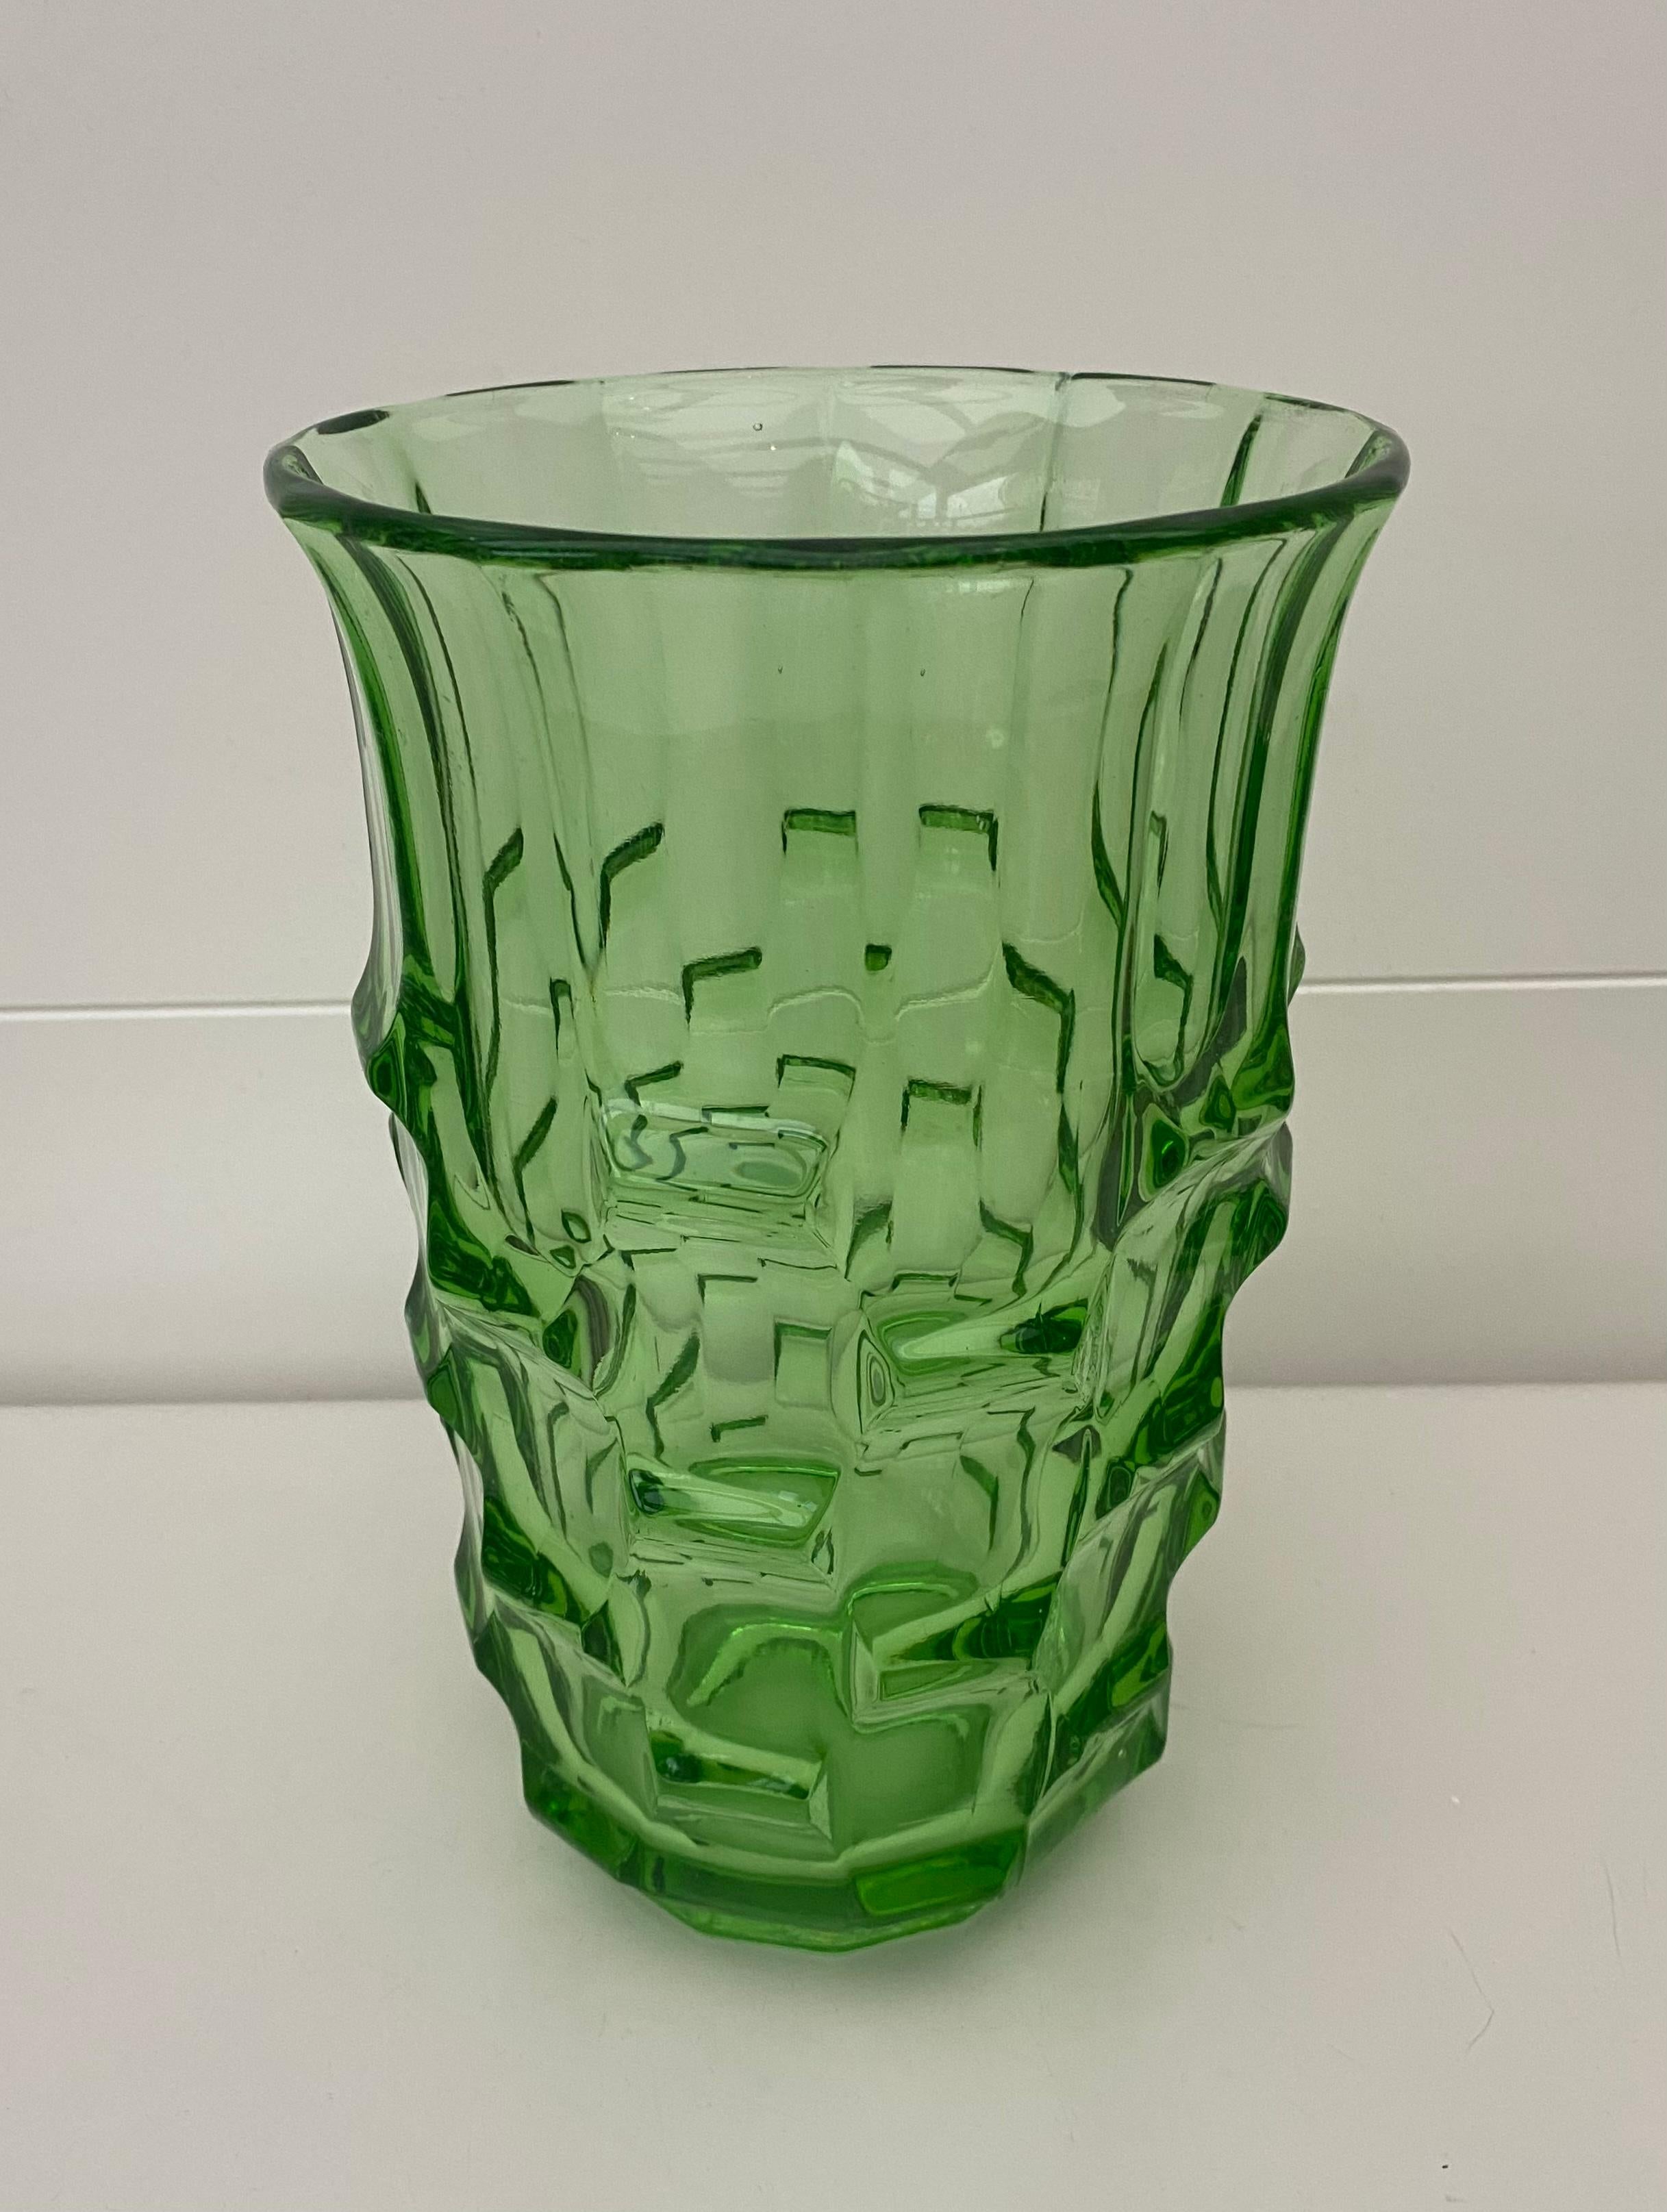 Striking green vase by August Walther & Söhne, Dresden, Germany, Ca. 1936. This bright shining green vase features magnificent graphic decoration and remains in stunning condition for it’s age. The piece will draw the attention in any room.